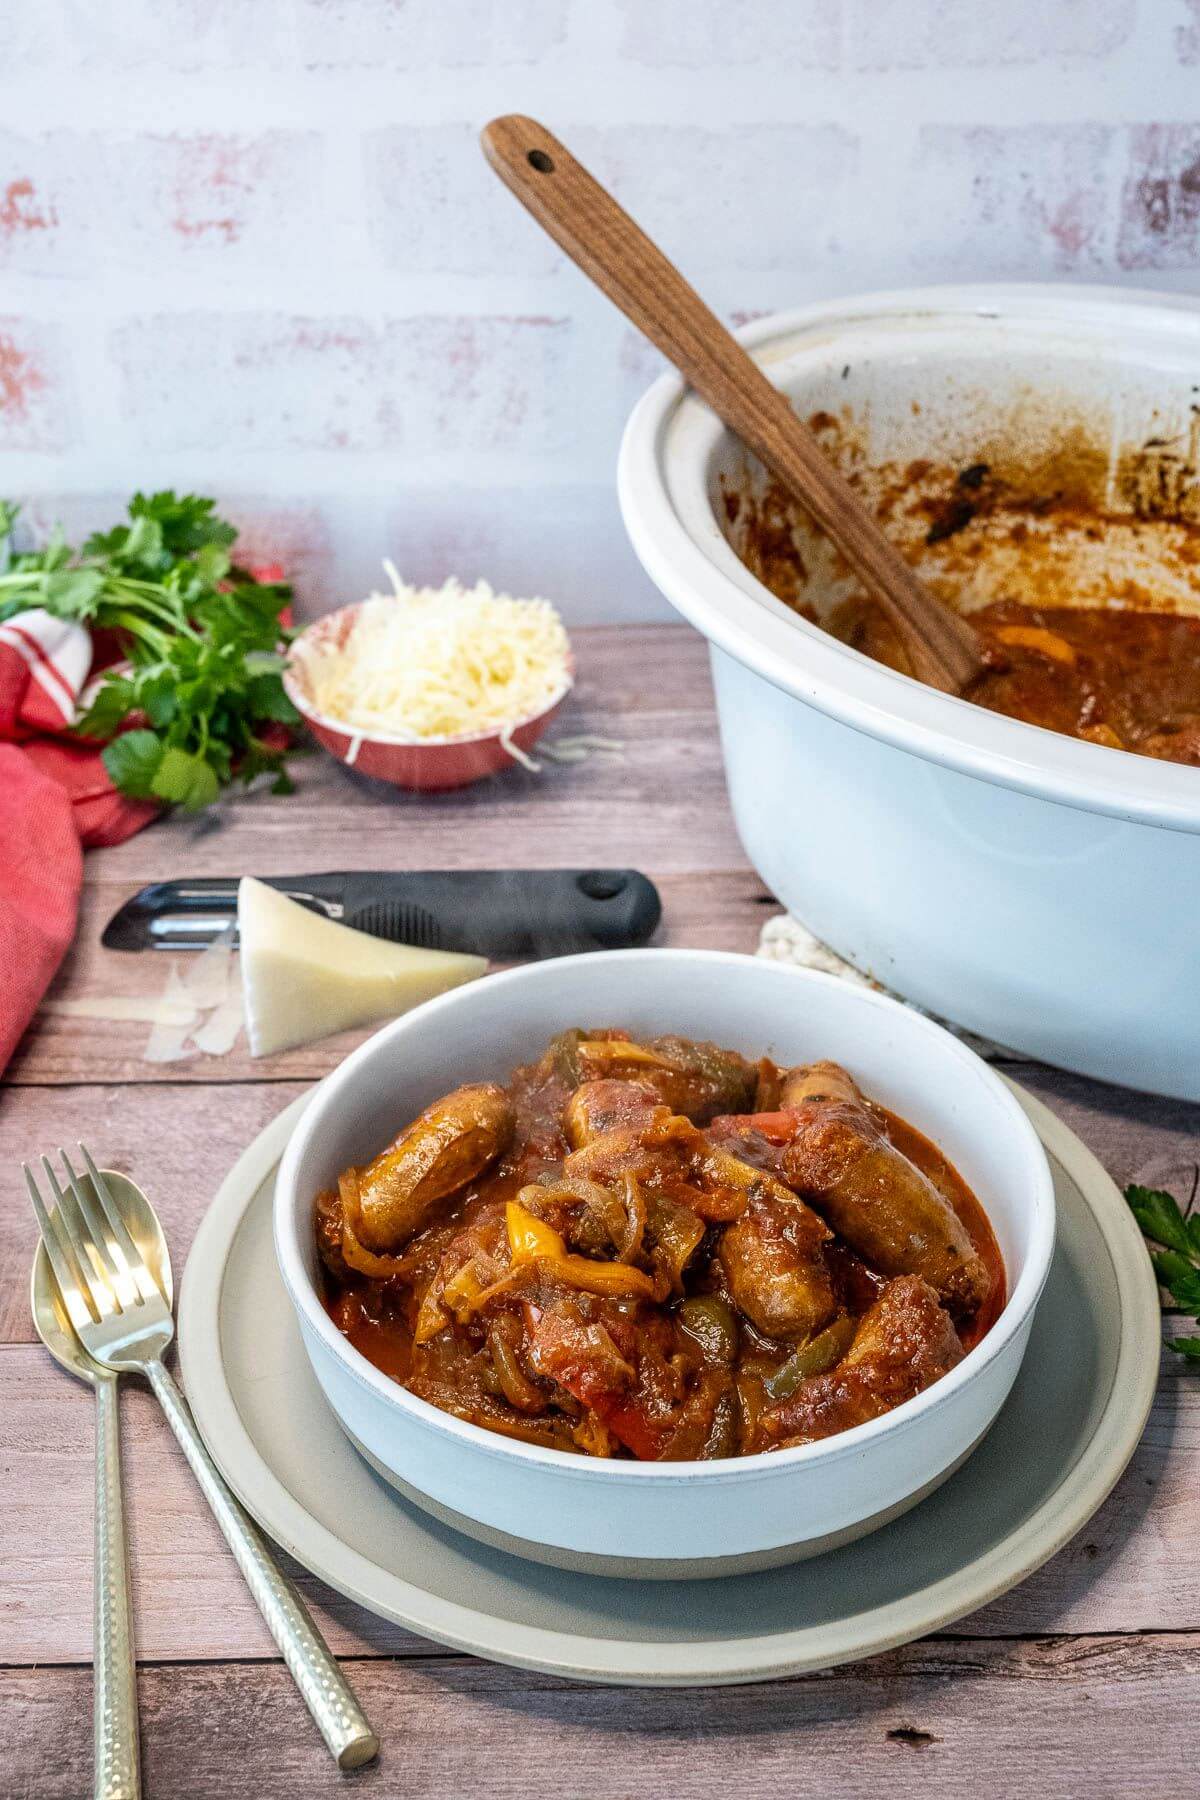 A fork lies on a spoon next to a filled bowl of sausage and pepper mix by its crock pot.